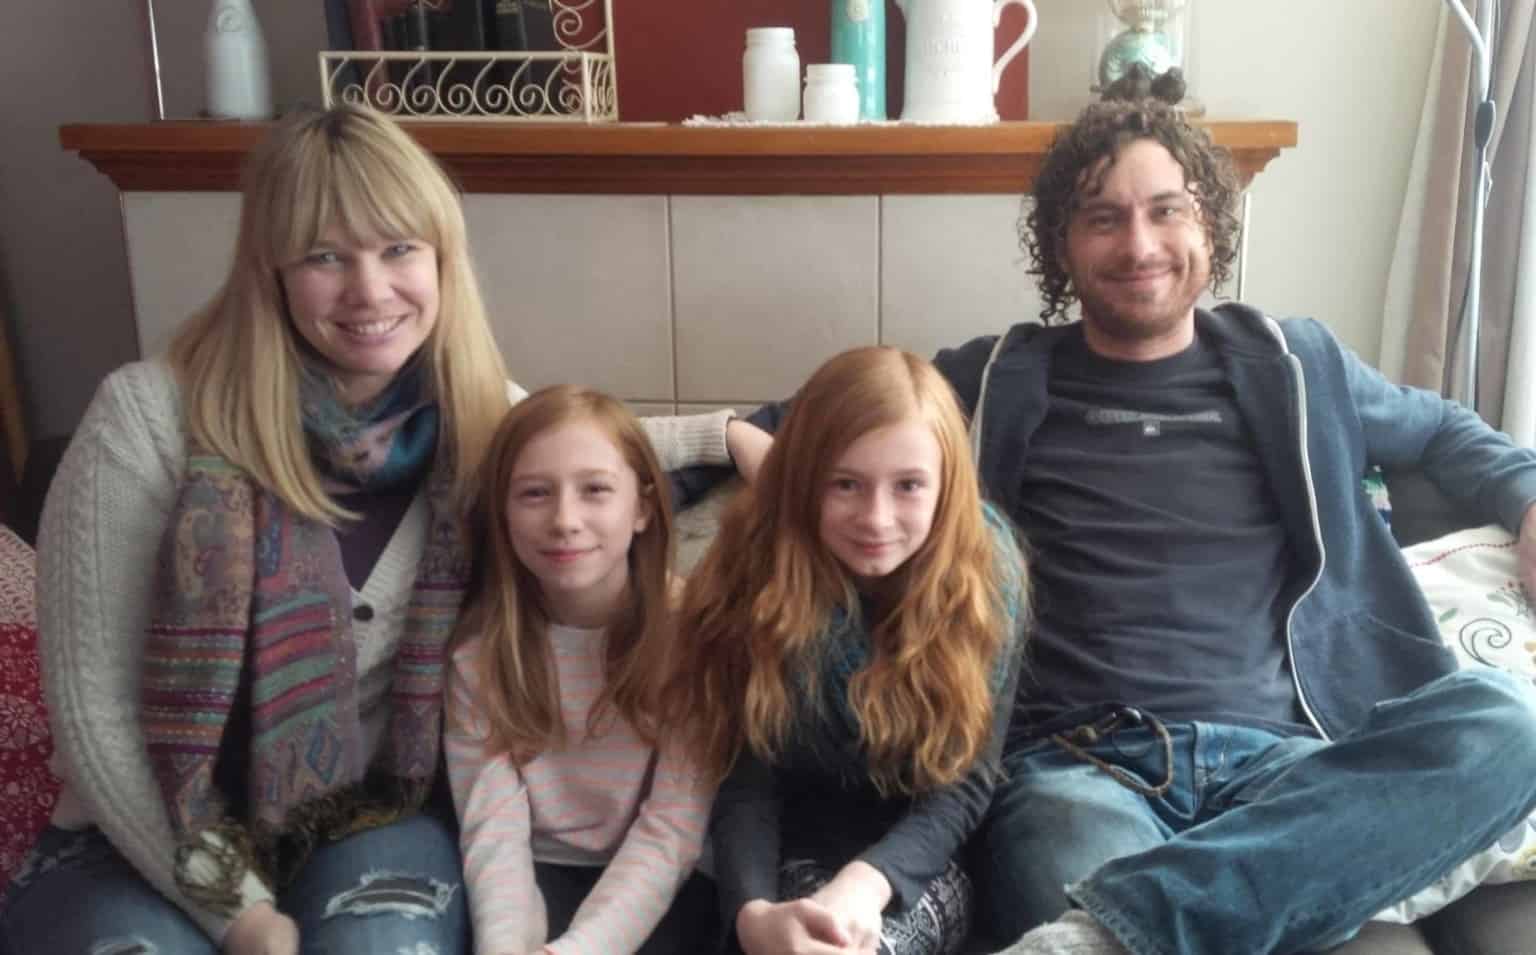 The Kowalski Family: Stephanie, Nathan, and their two daughters